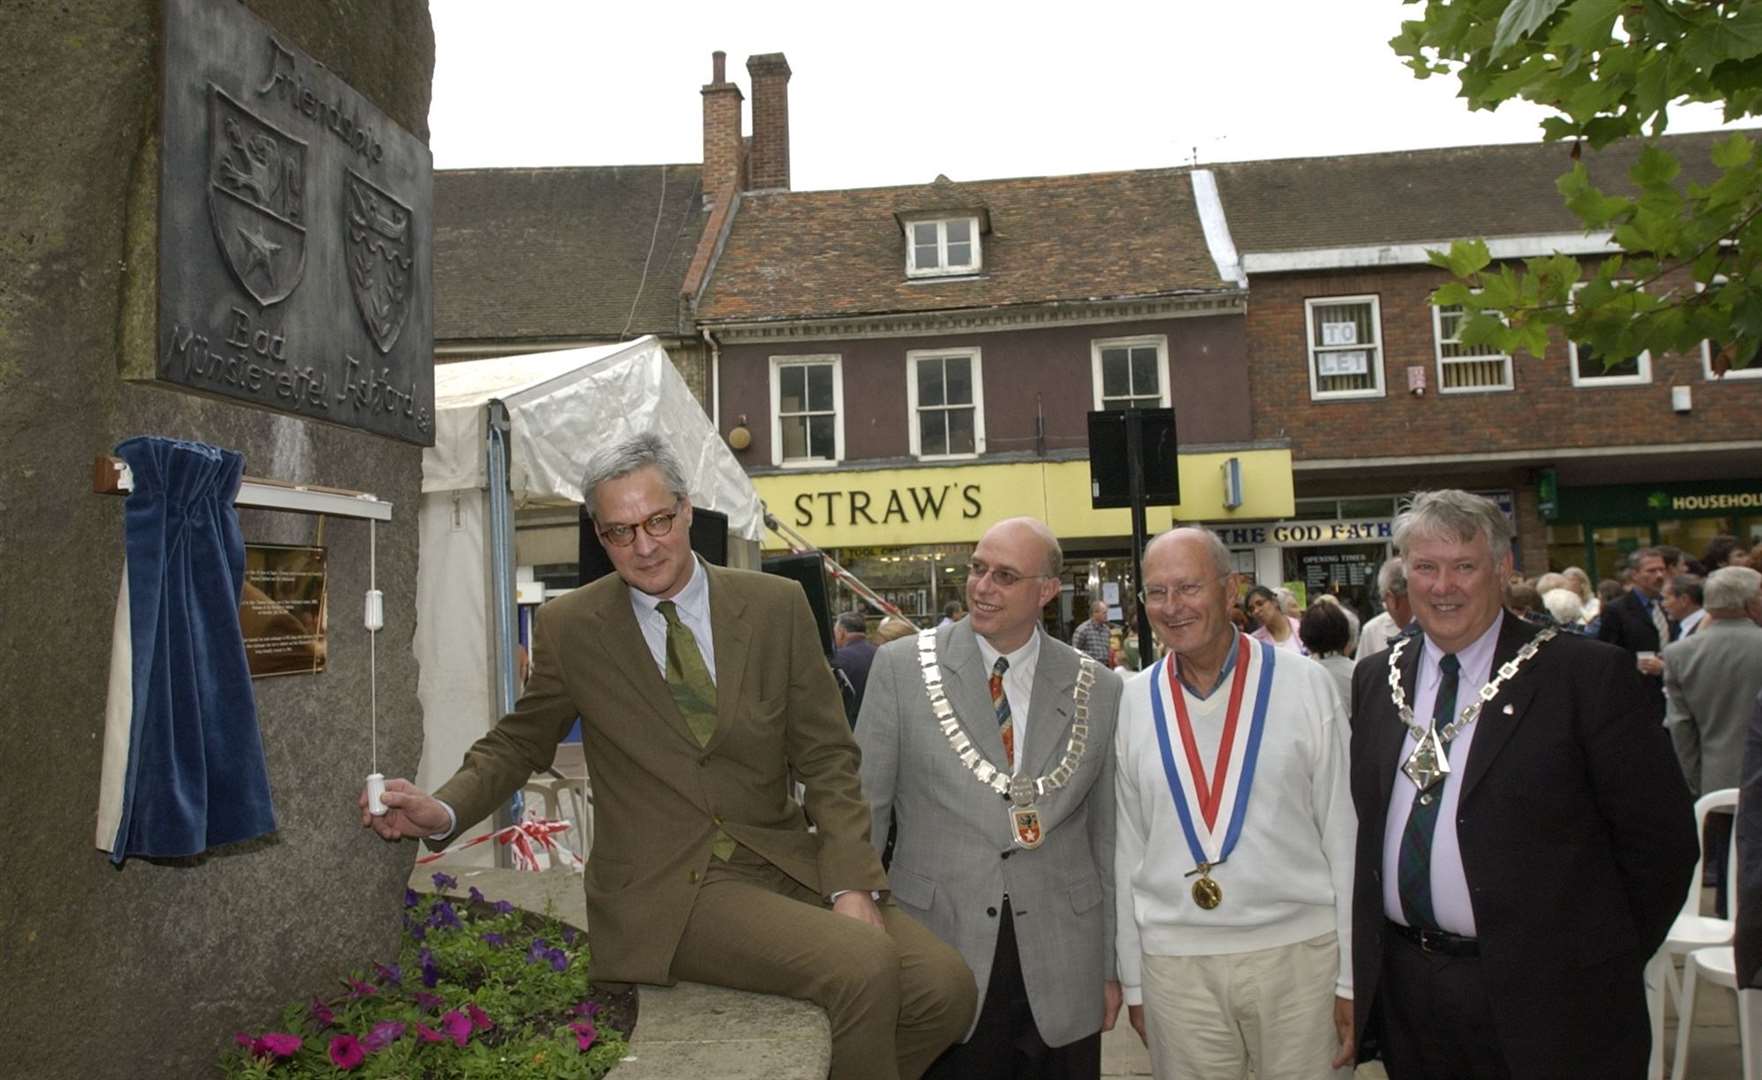 A plaque is unveiled on Ashford's friendship rock in the Lower High Street in 2003. The rock commemorates the twin links between Ashford and Bad Münstereifel